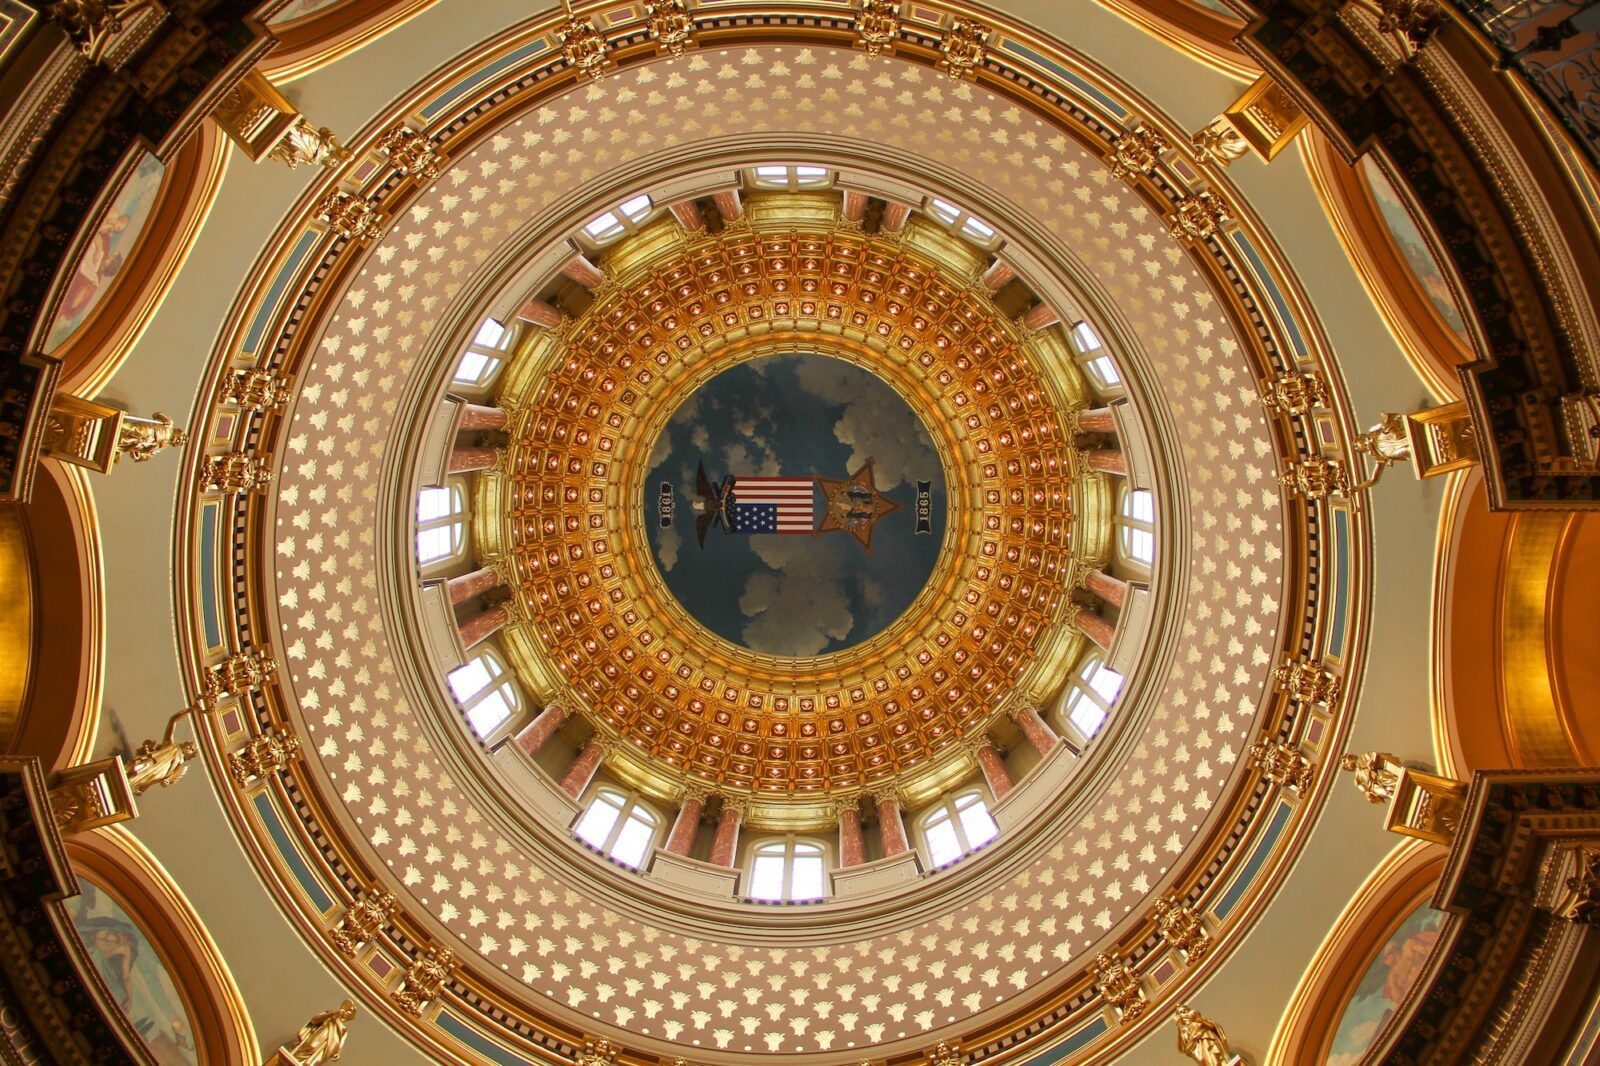 Shapes at Iowa State Capitol dome as viewed from inside the rotunda in Des Moines. IA.